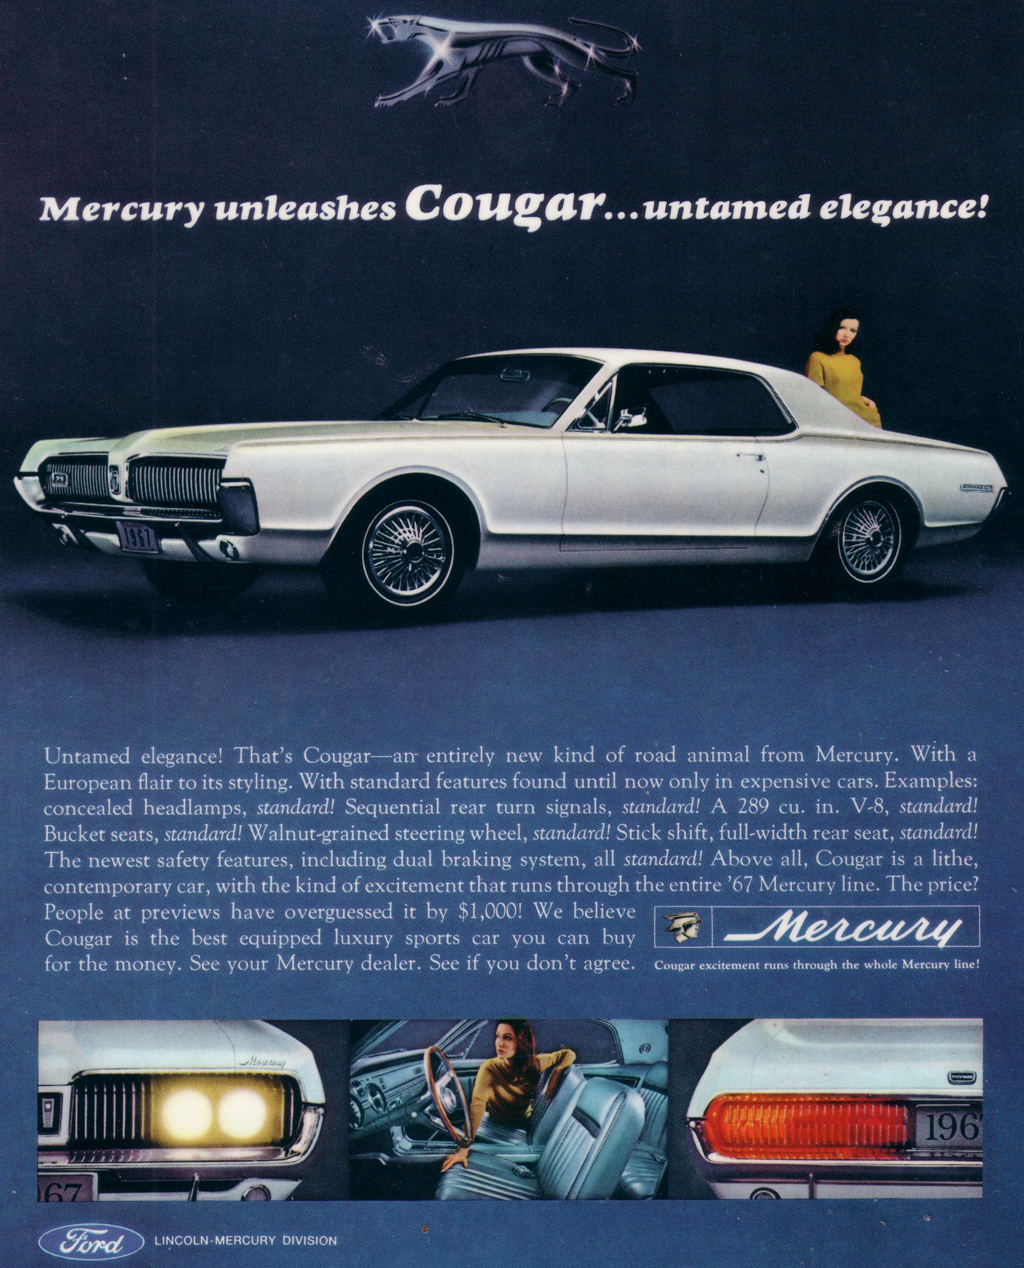 1967 Mercury Cougar ad with wire wheel covers